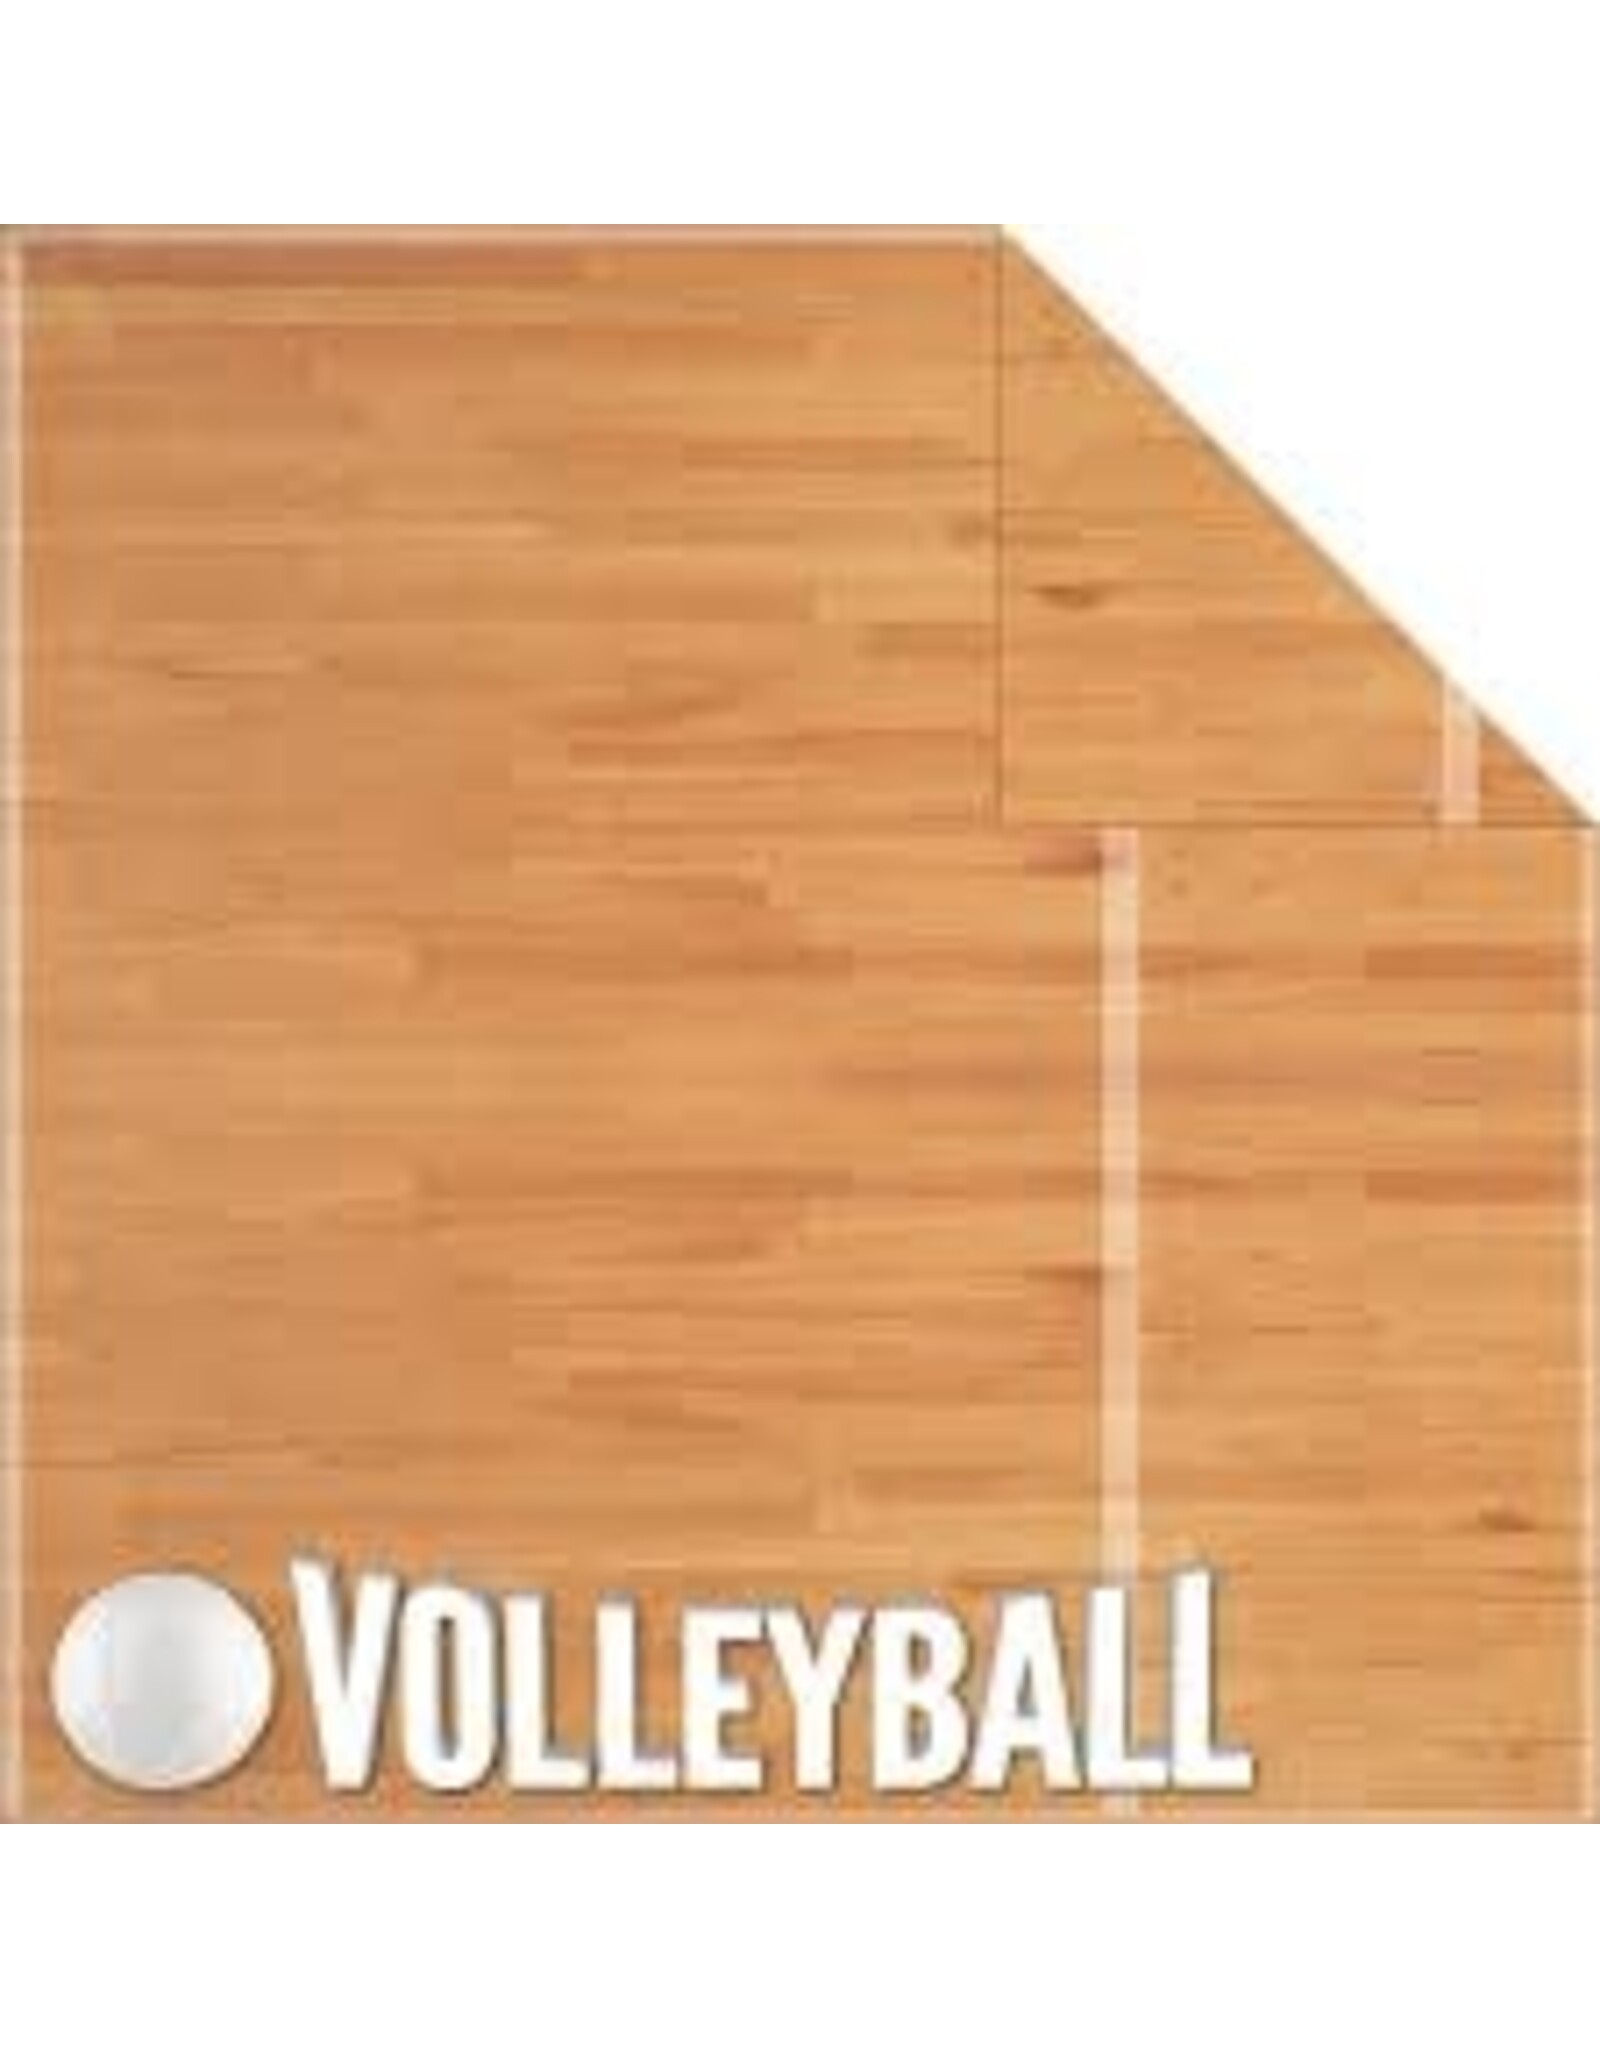 Volleyball court paper